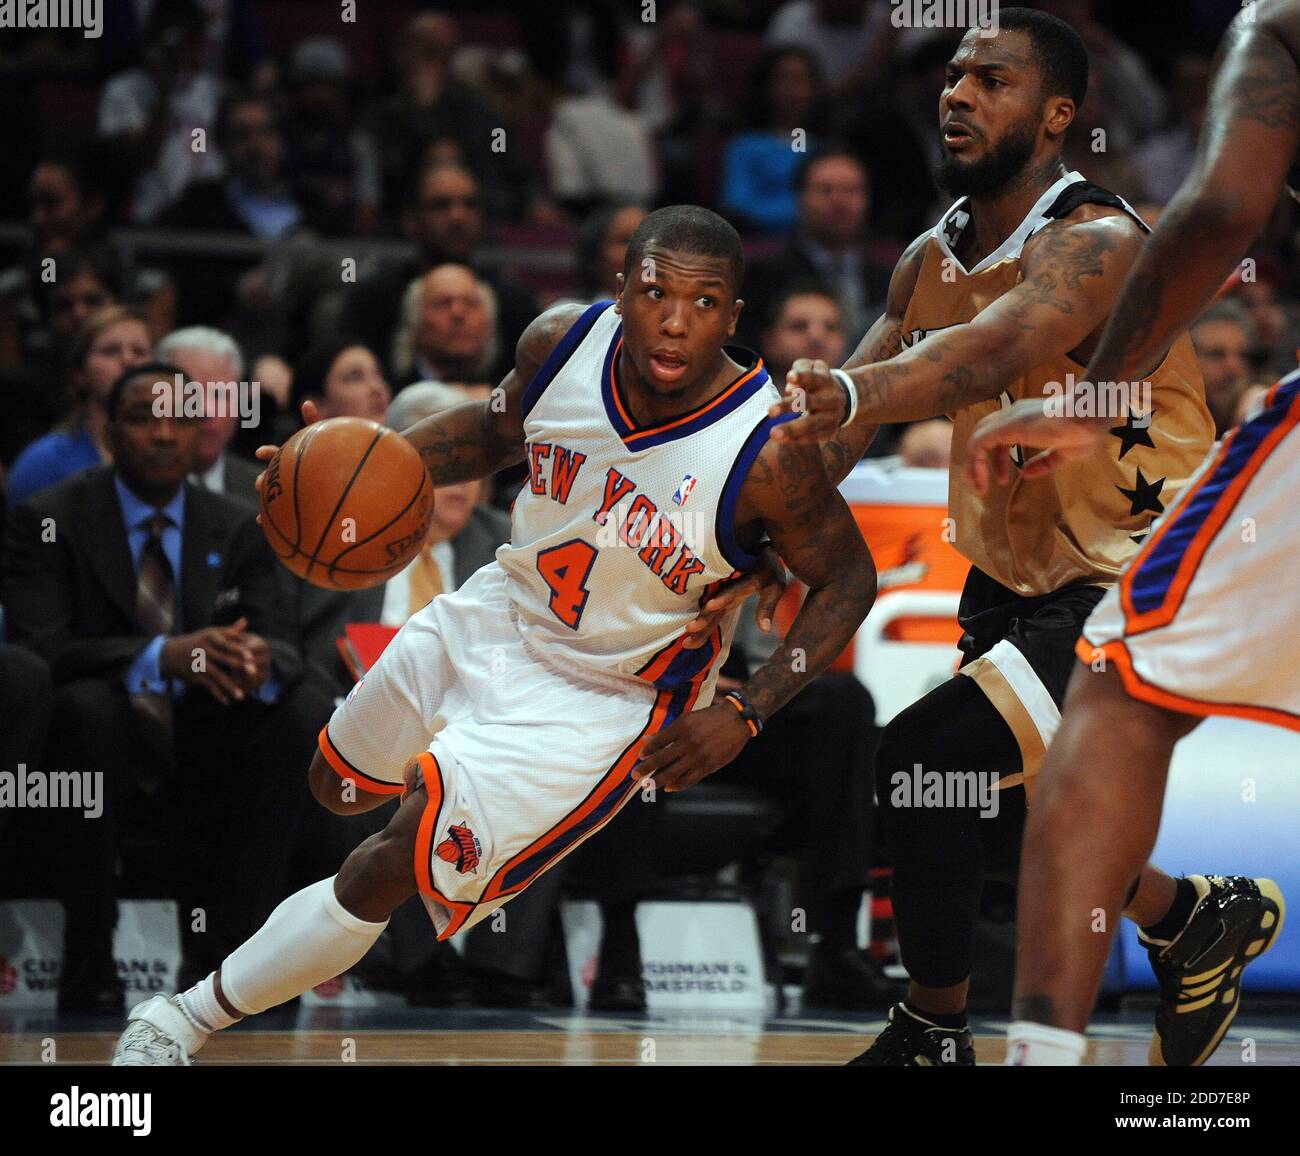 New York Knicks' Nate Robinson drives the baseline past Washington Wizards' DeShawn Stevenson in the fourth quarter at Madison Square Garden in New York City, NY, USA on January 15, 2008. New York Knicks won 105-93. Photo by J. Conrad Williams Jr./Newsday/MCT/Cameleon/ABACAPRESS.COM Stock Photo